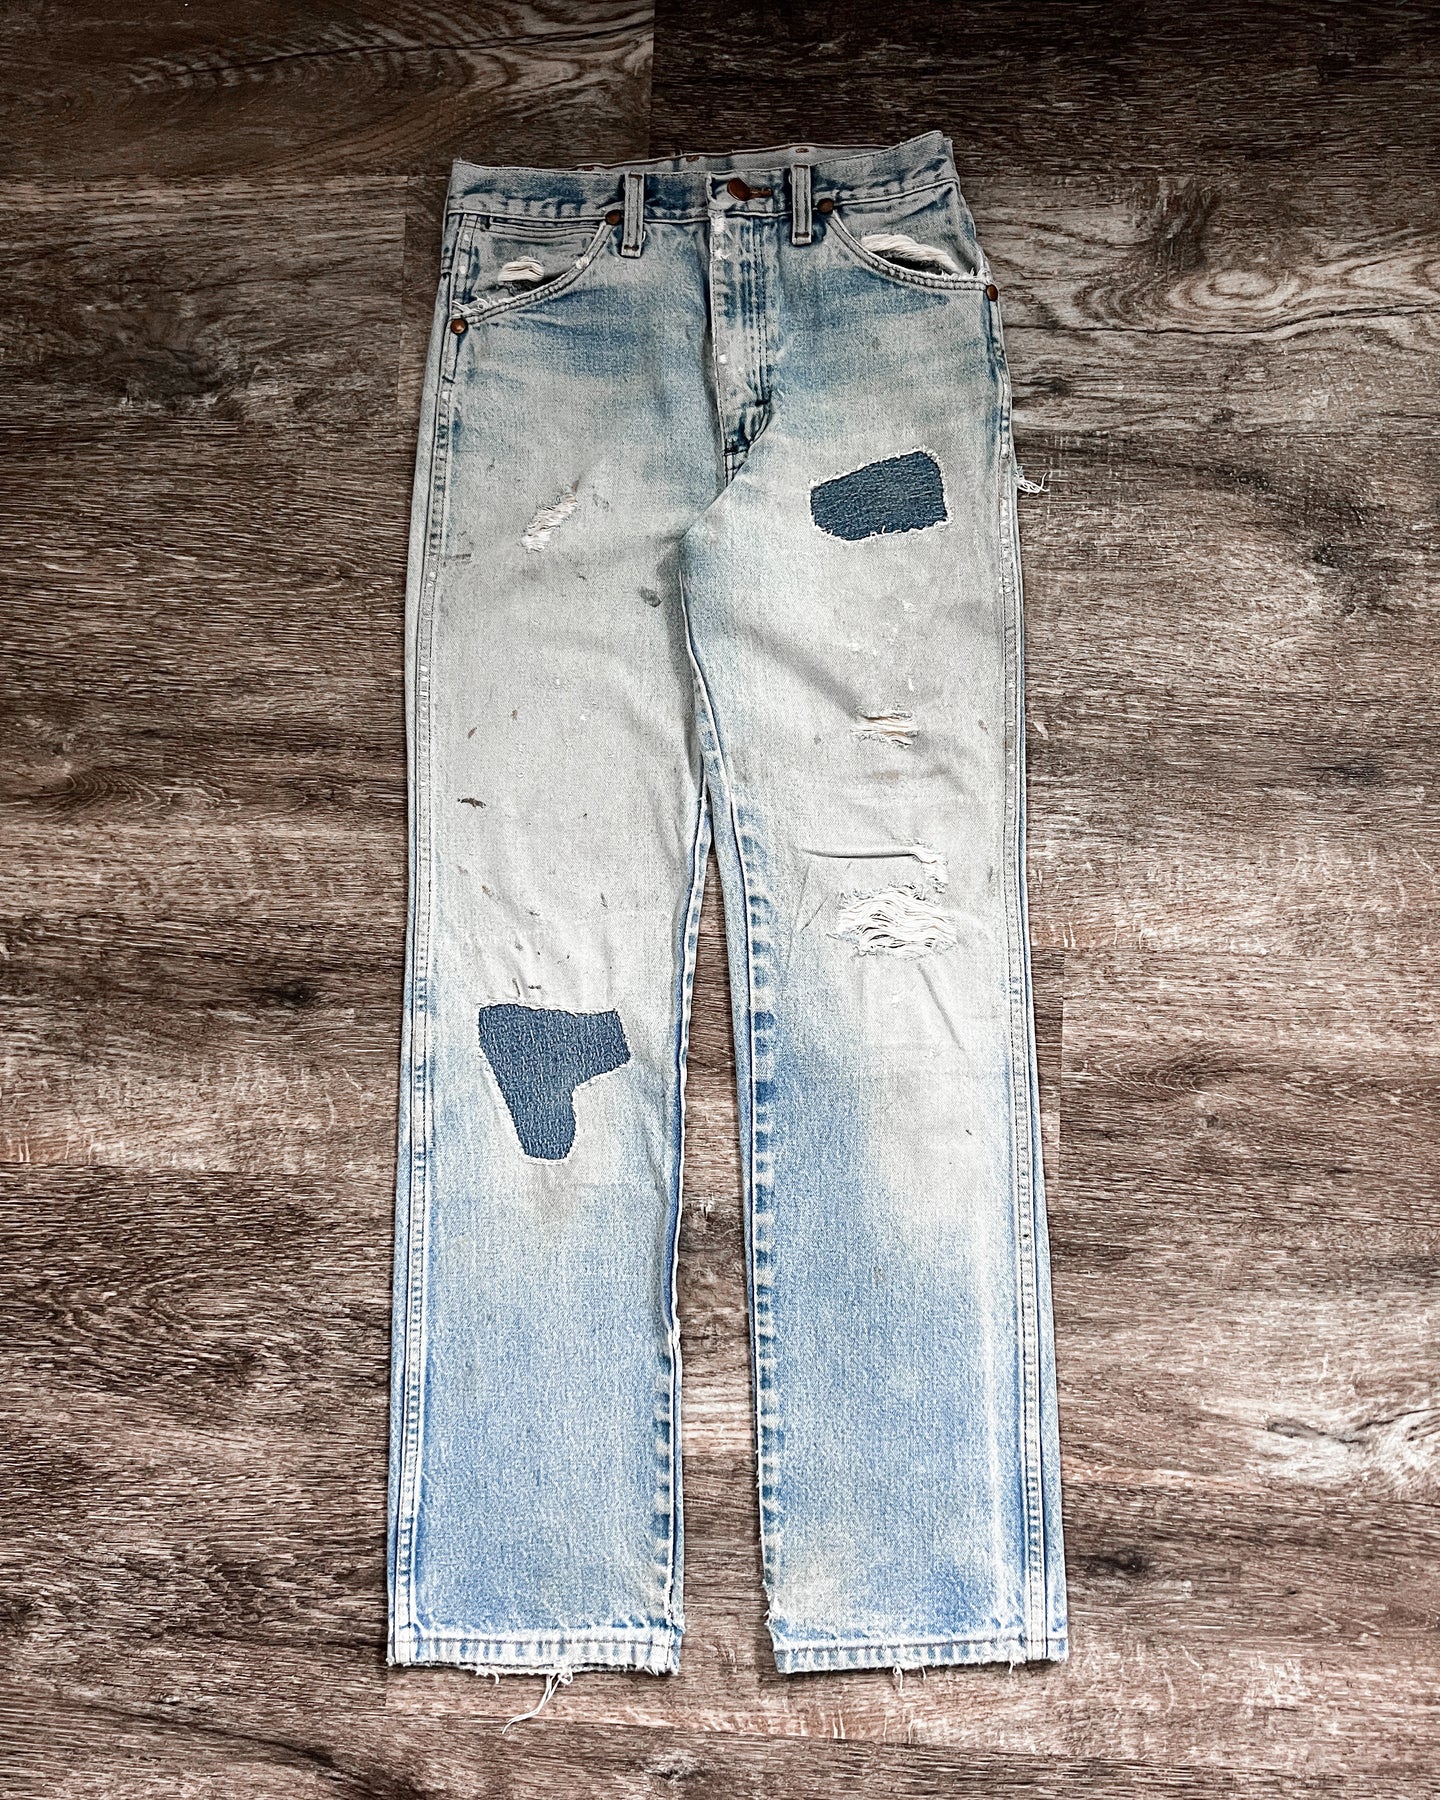 1990s Wrangler Patchwork Repaired Light Wash Jeans - Size 28 x 31